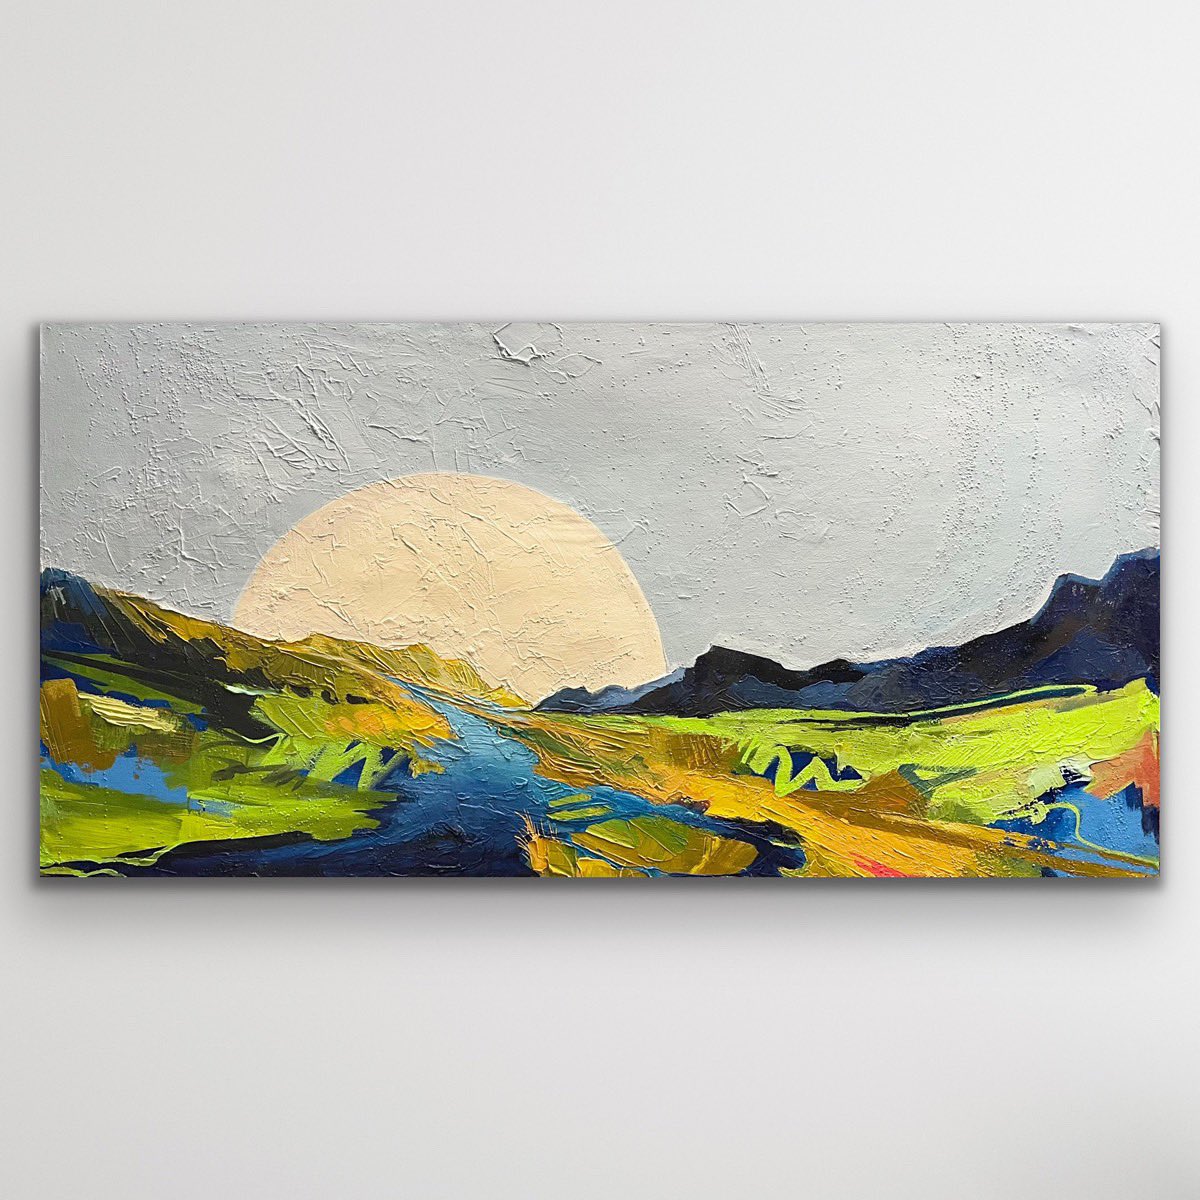 Brand new painting titled “we watch the rising sun” is now online! This acrylic on canvas painting is mounted to a birch panel and features an modern abstract take on a mountain landscape! See the details at samanthawilliamschapelsky.shop/products/we-wa… #yeg #yegart #yyc #yycart #art #canadaart #yvr